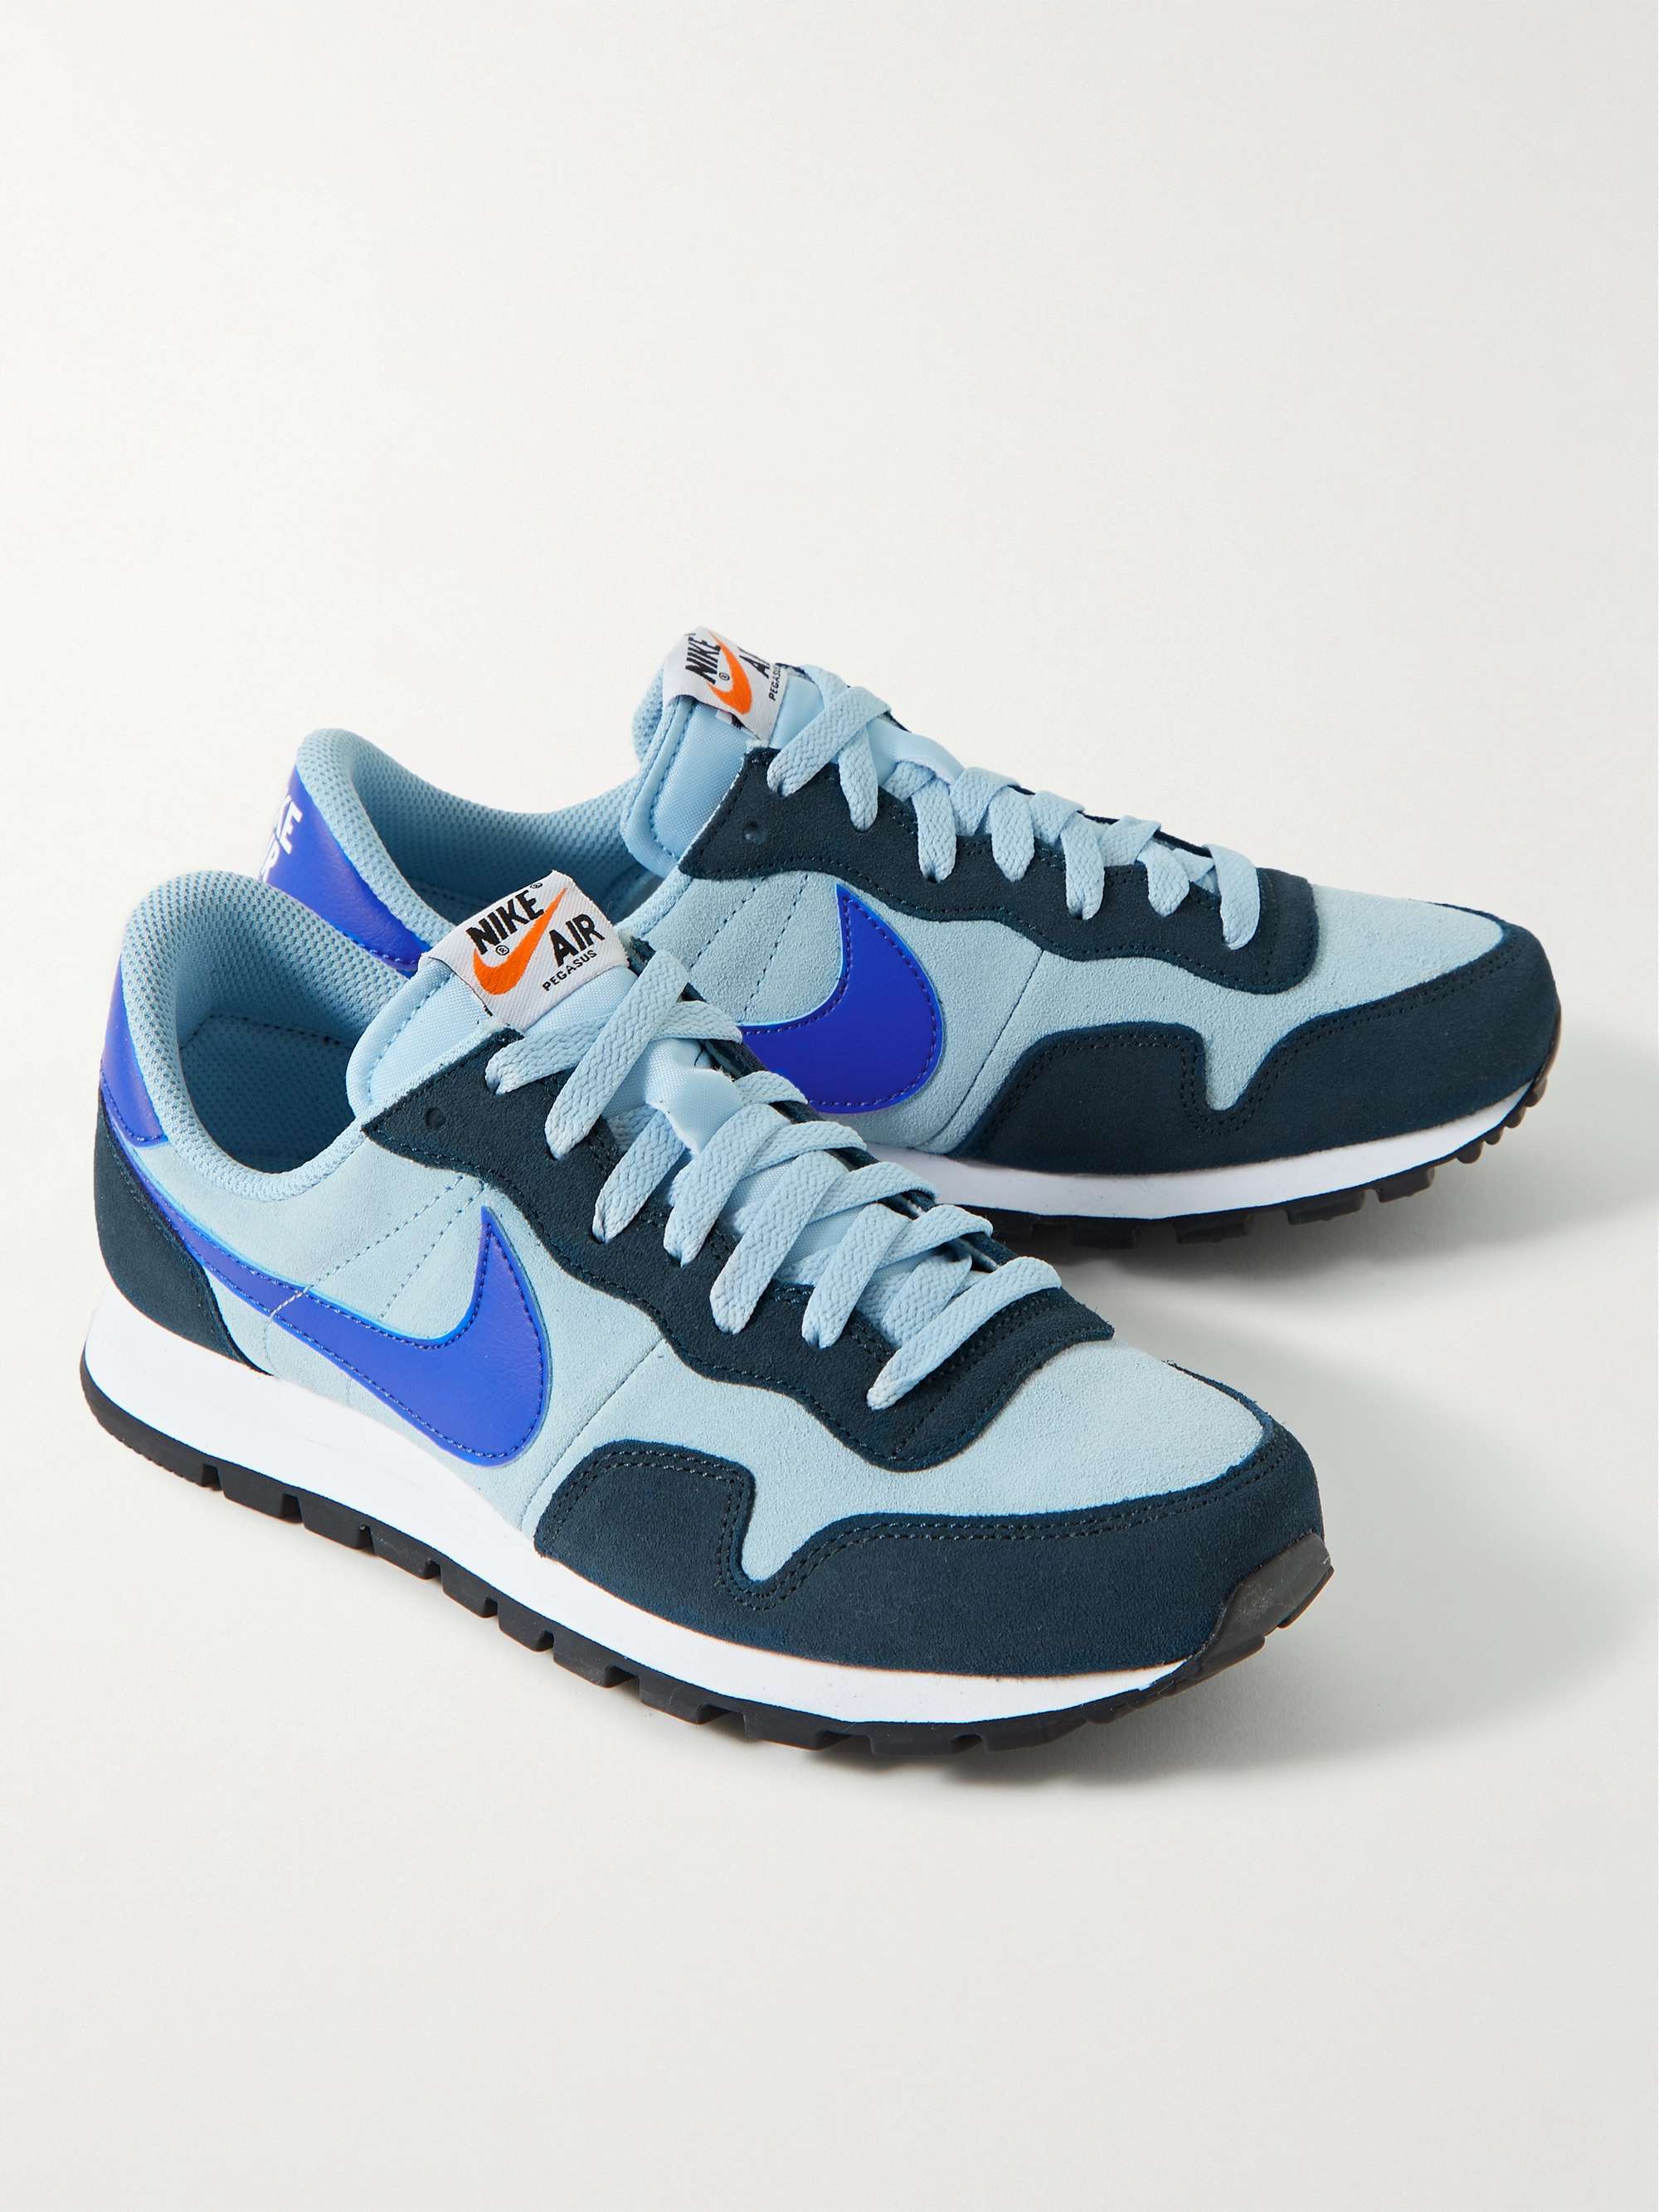 NIKE Air Pegasus 83 Leather-Trimmed Suede Sneakers | MR PORTER